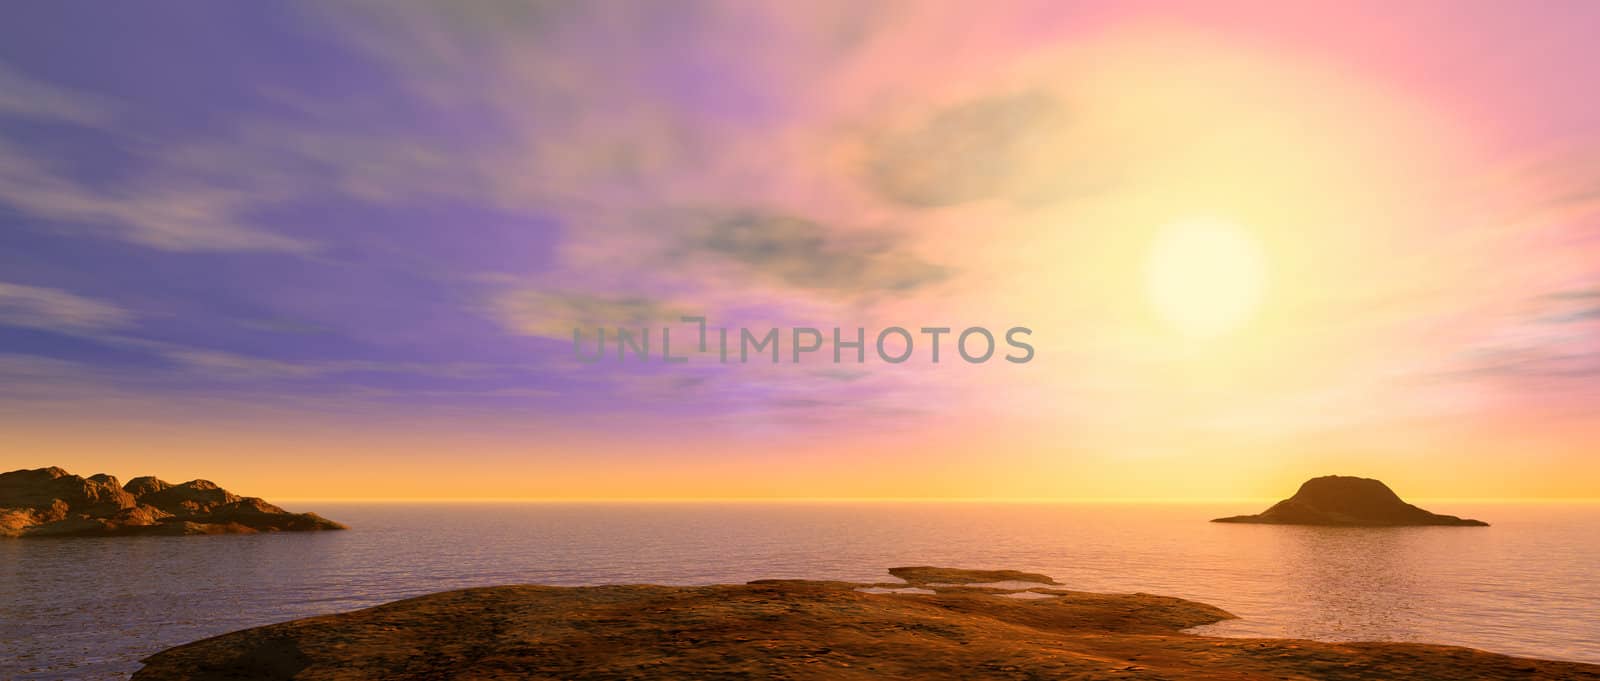 A picturesque sunset above oceans and reef by galdzer